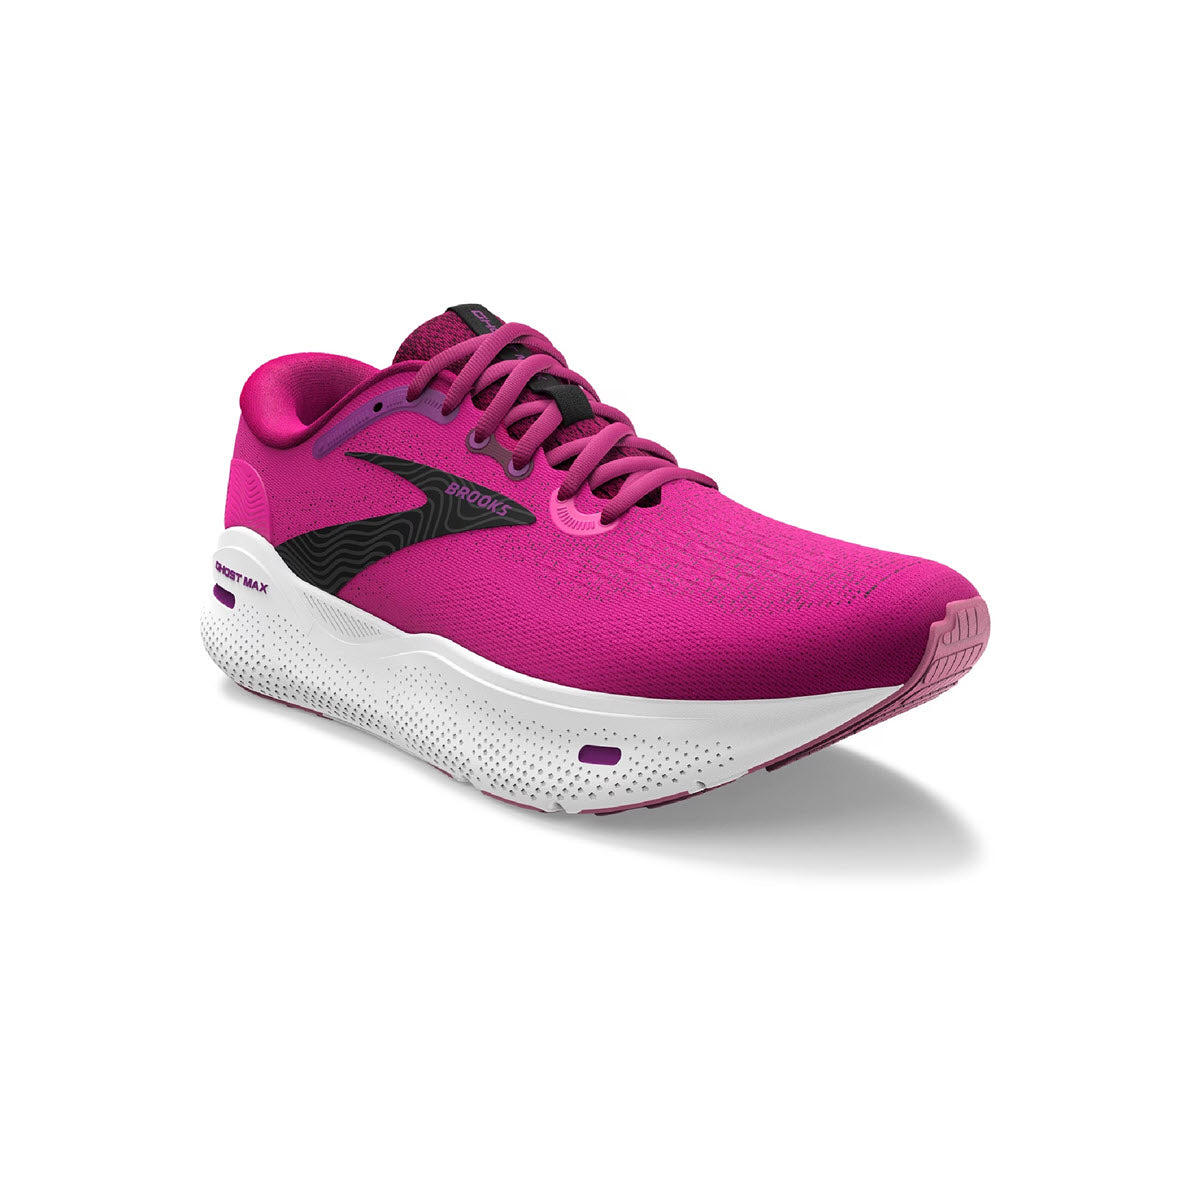 Bright pink Brooks GHOST MAX running shoe with white sole and black logo on a white background.